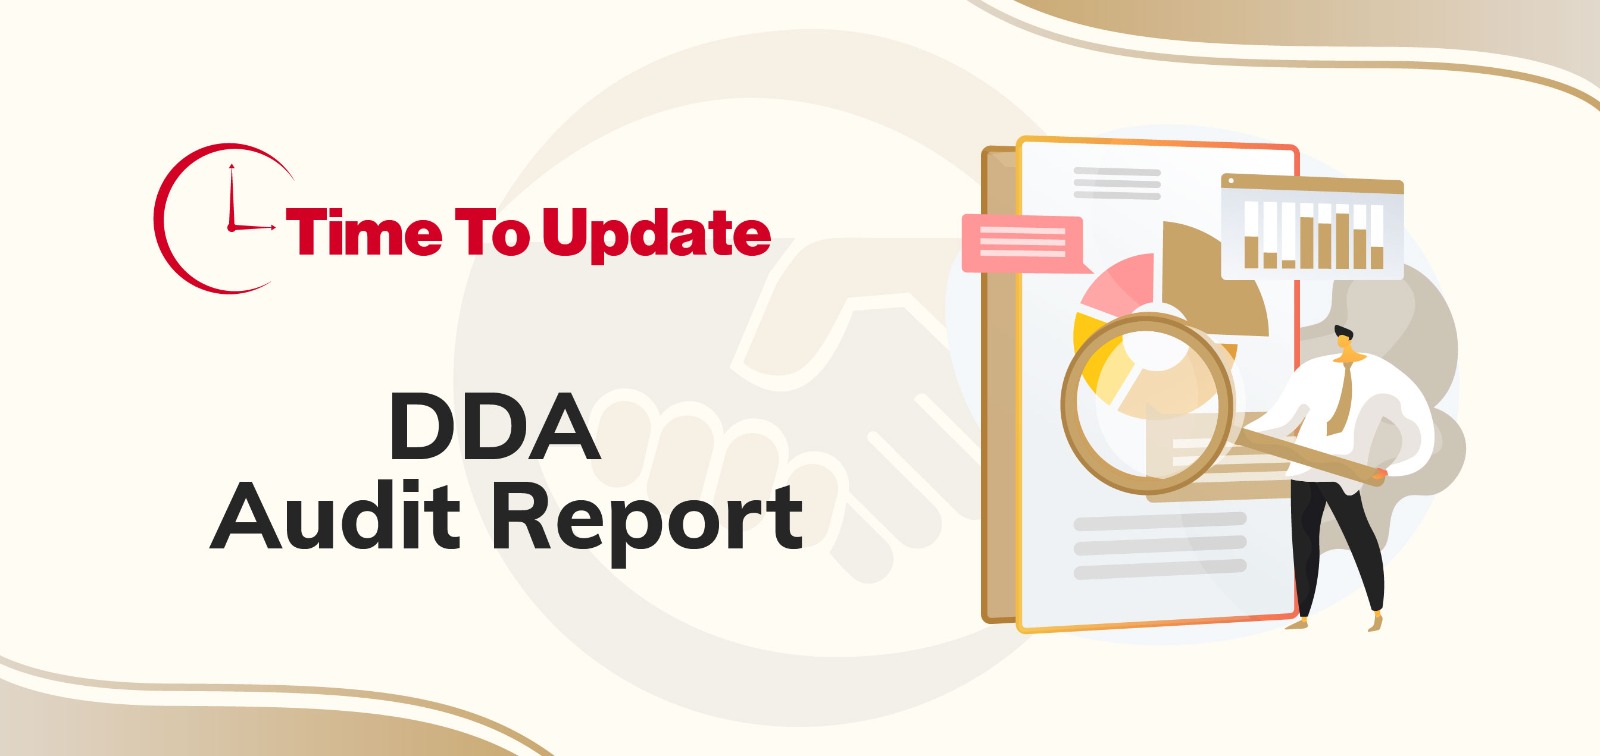 DDA Audit Report Submission Mandatory: Approaching Deadline 